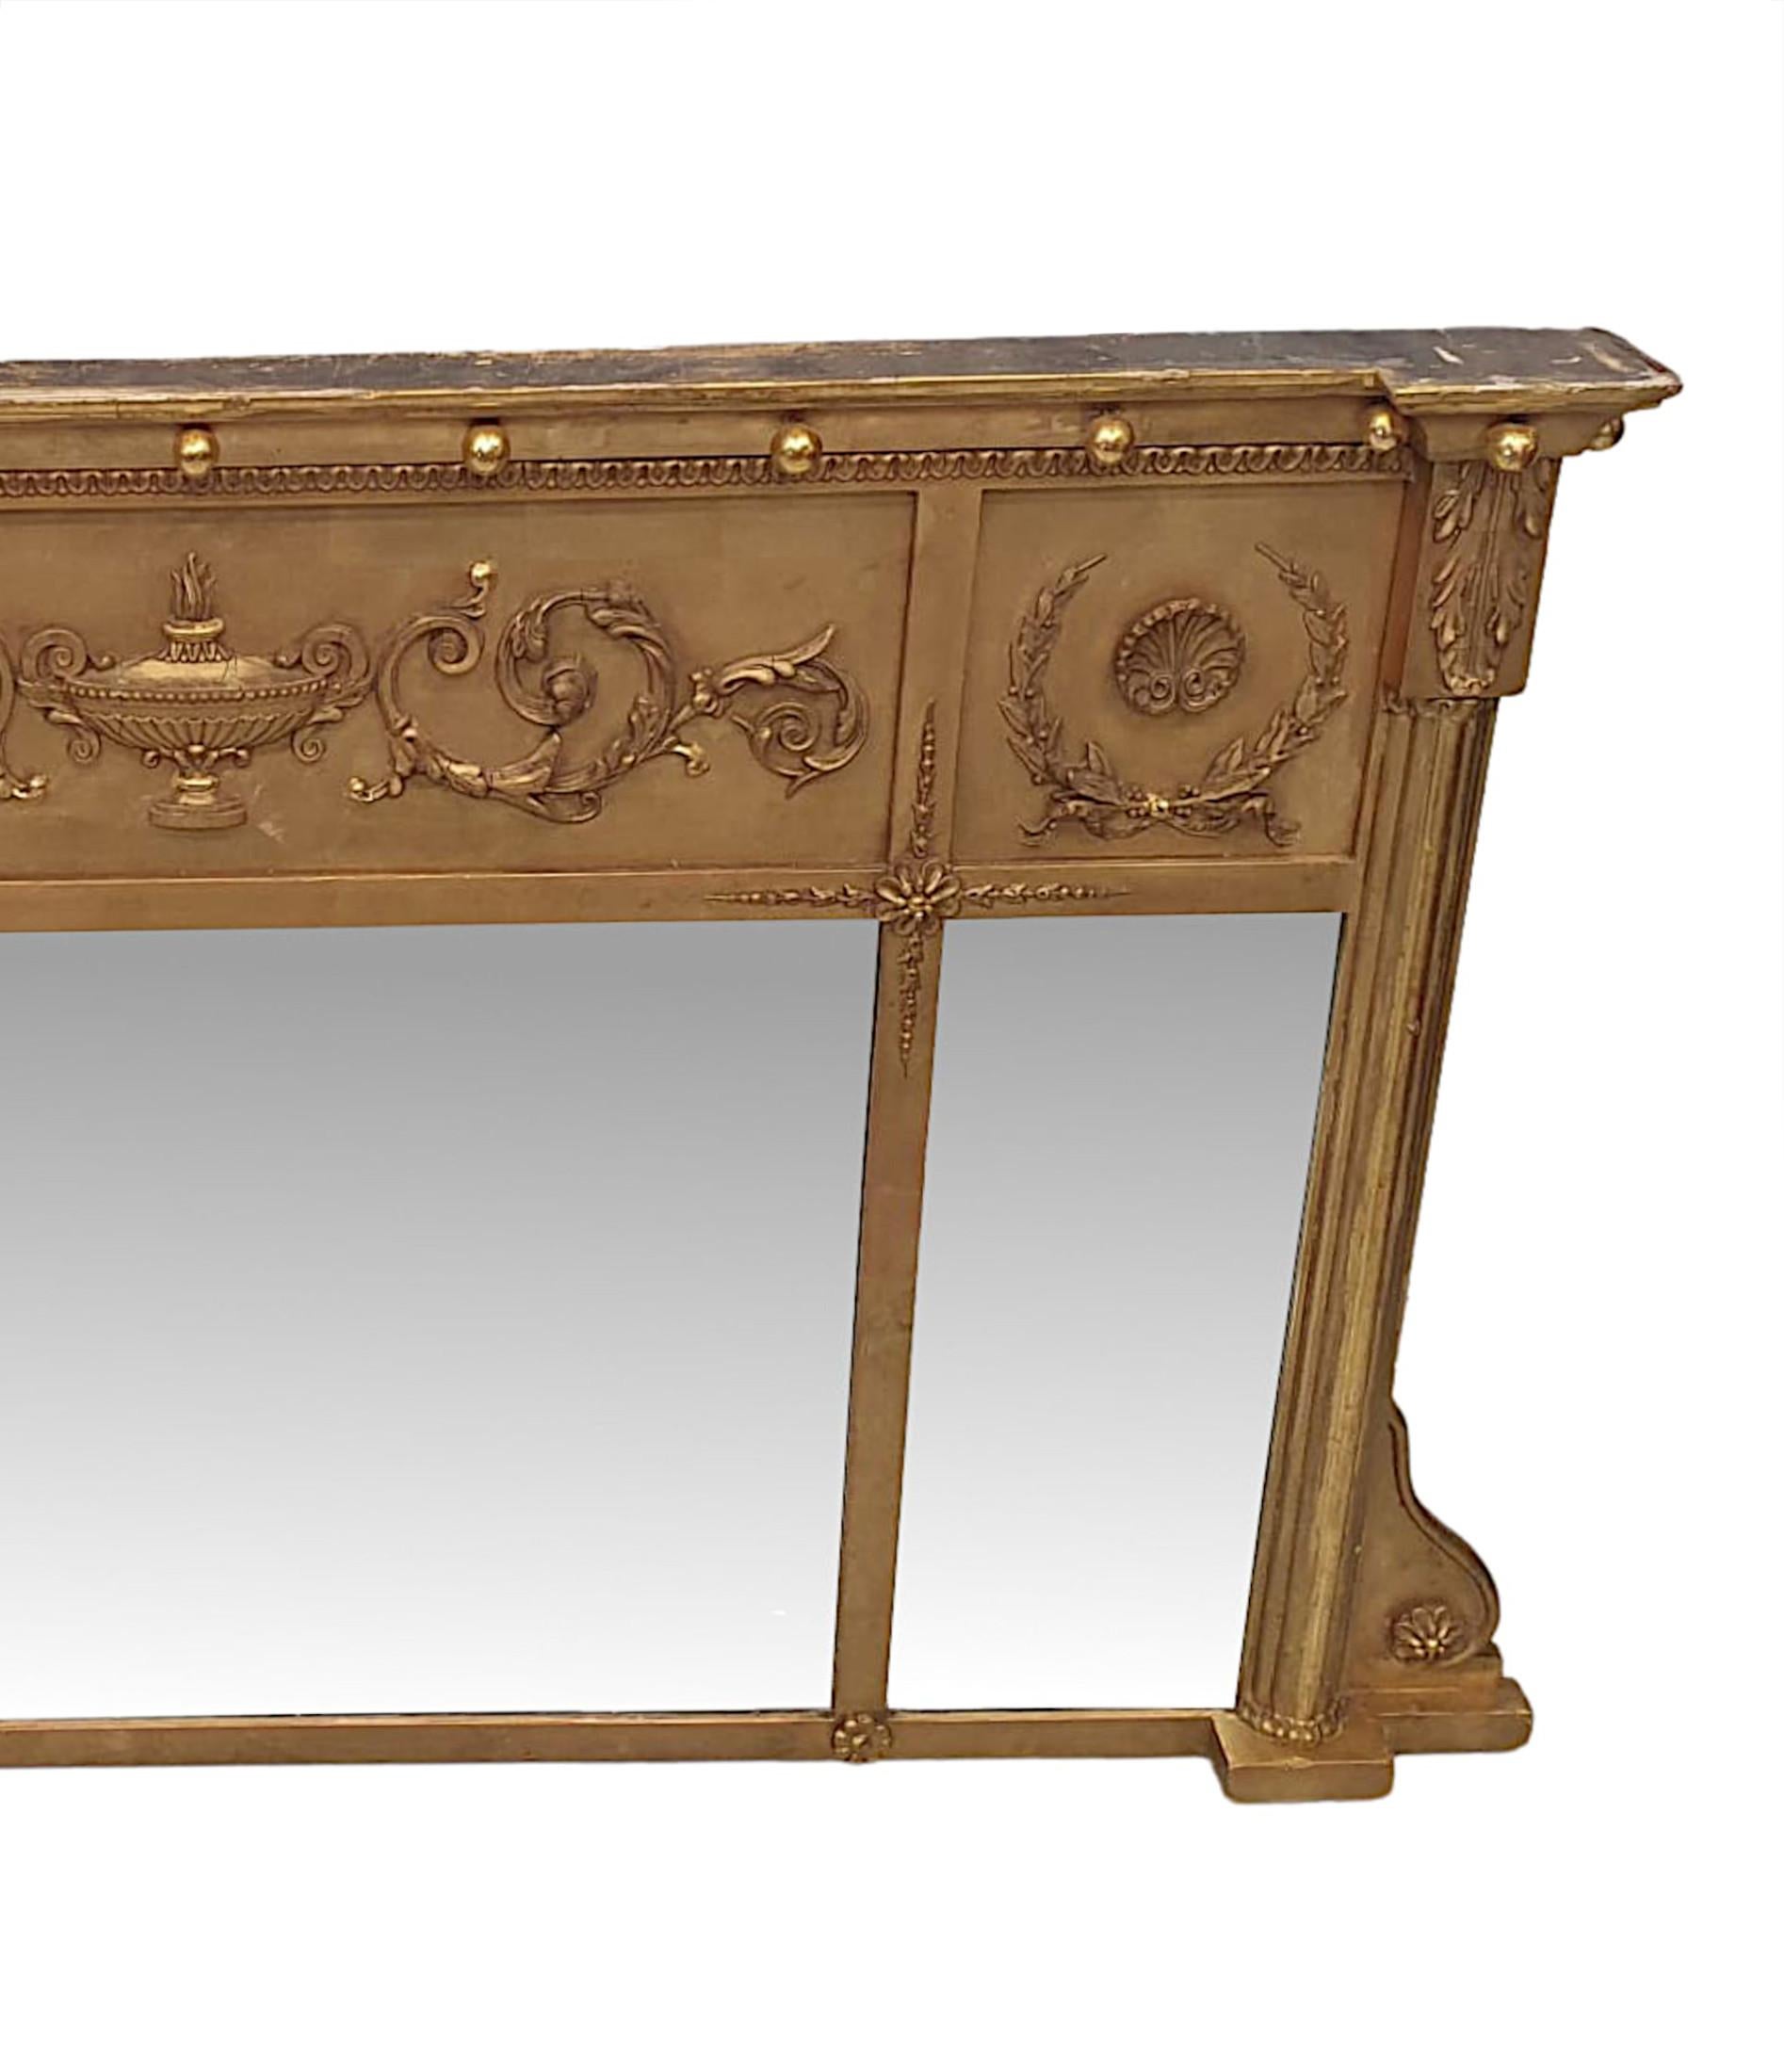 A fabulous Edwardian three compartmental giltwood overmantle mirror in the manner of Adams, of gorgeous quality and neat proportions. The central bevelled mirror glass plate of rectangular form flanked with two further glass plates, set within a